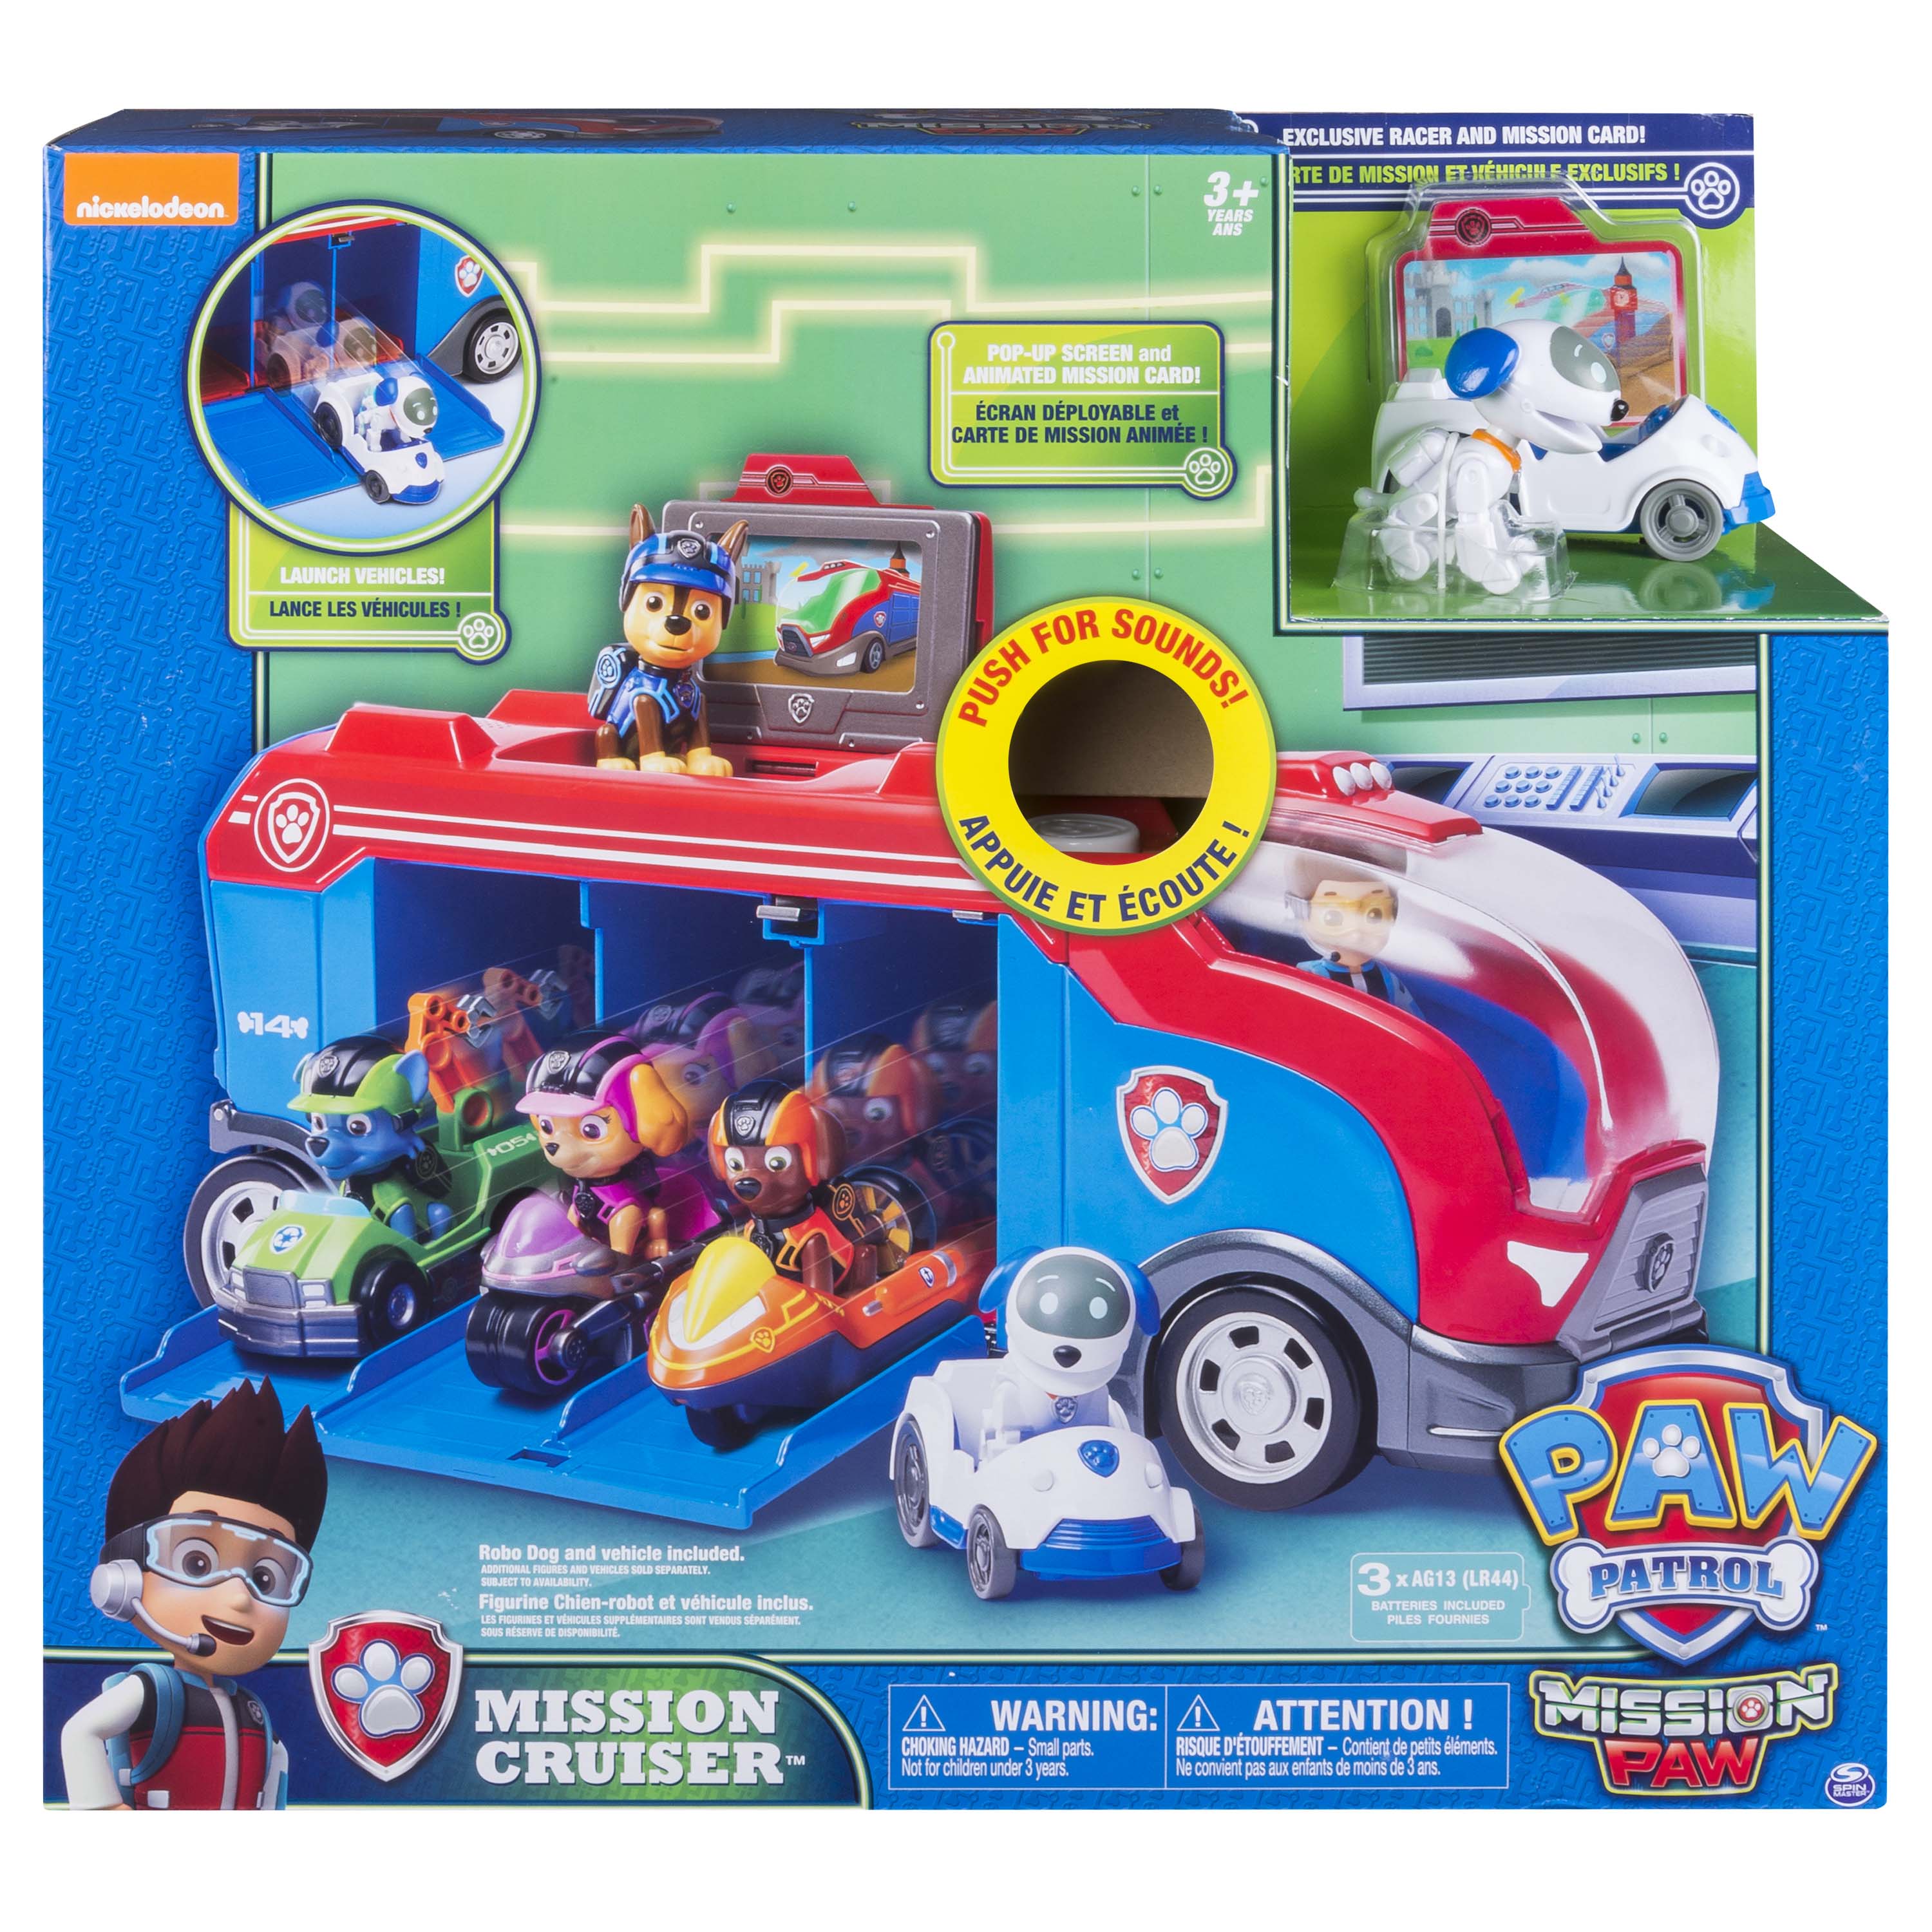 Paw Patrol Mission Cruiser by Spin Master